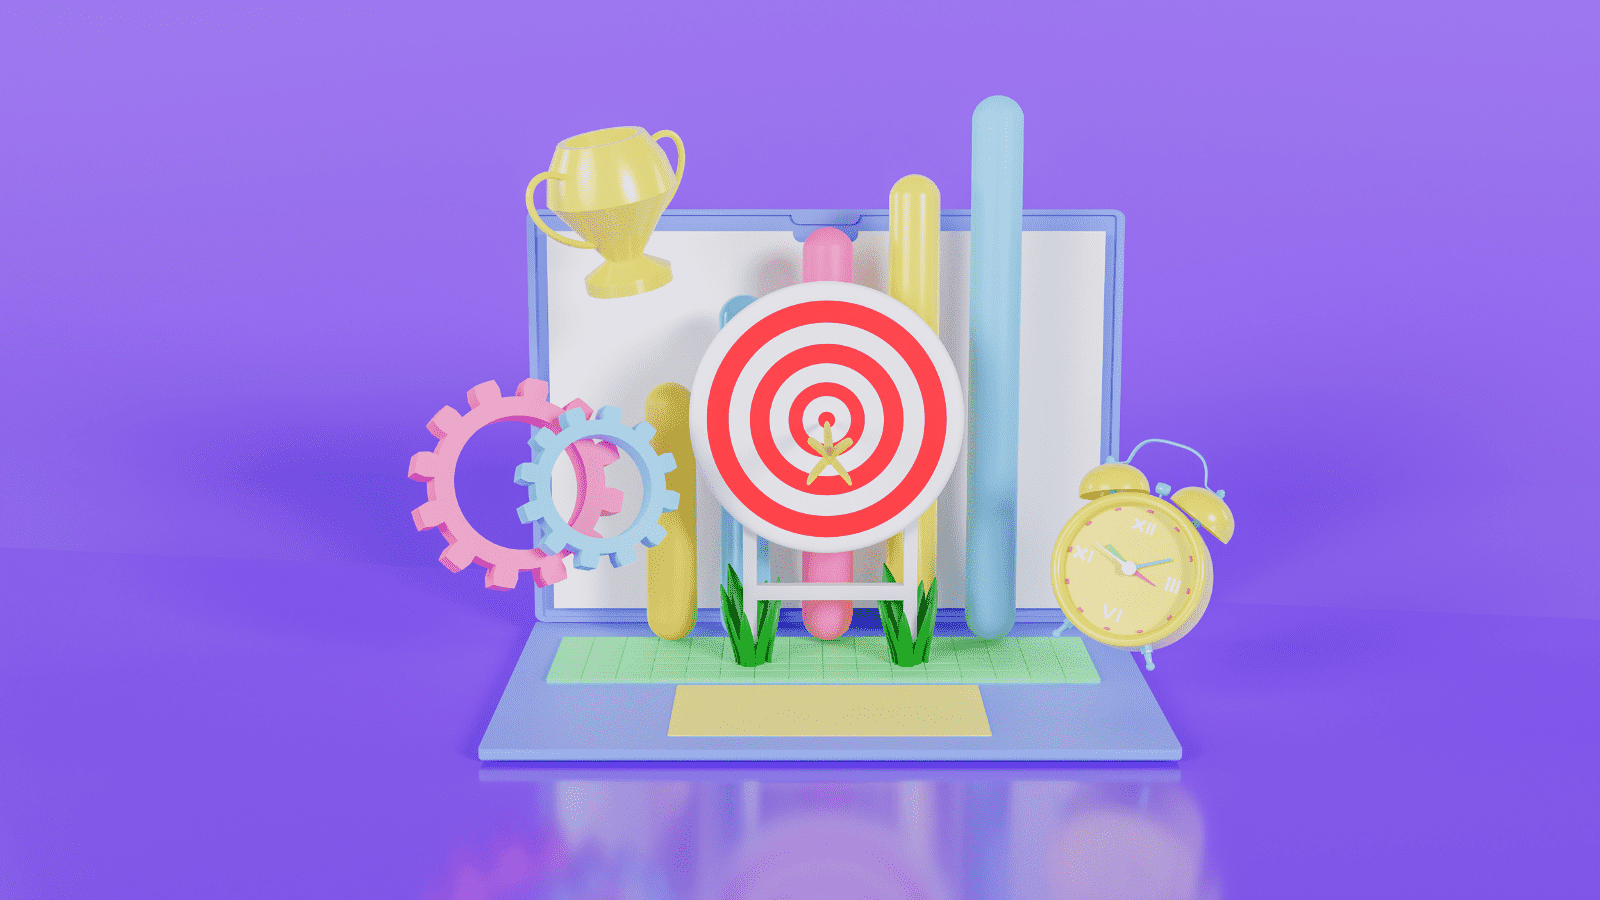 3d illustration of target achievement with arrow on target, trophy, gears, and bar graph, and an alarm clock, all on top of a laptop on a purple background